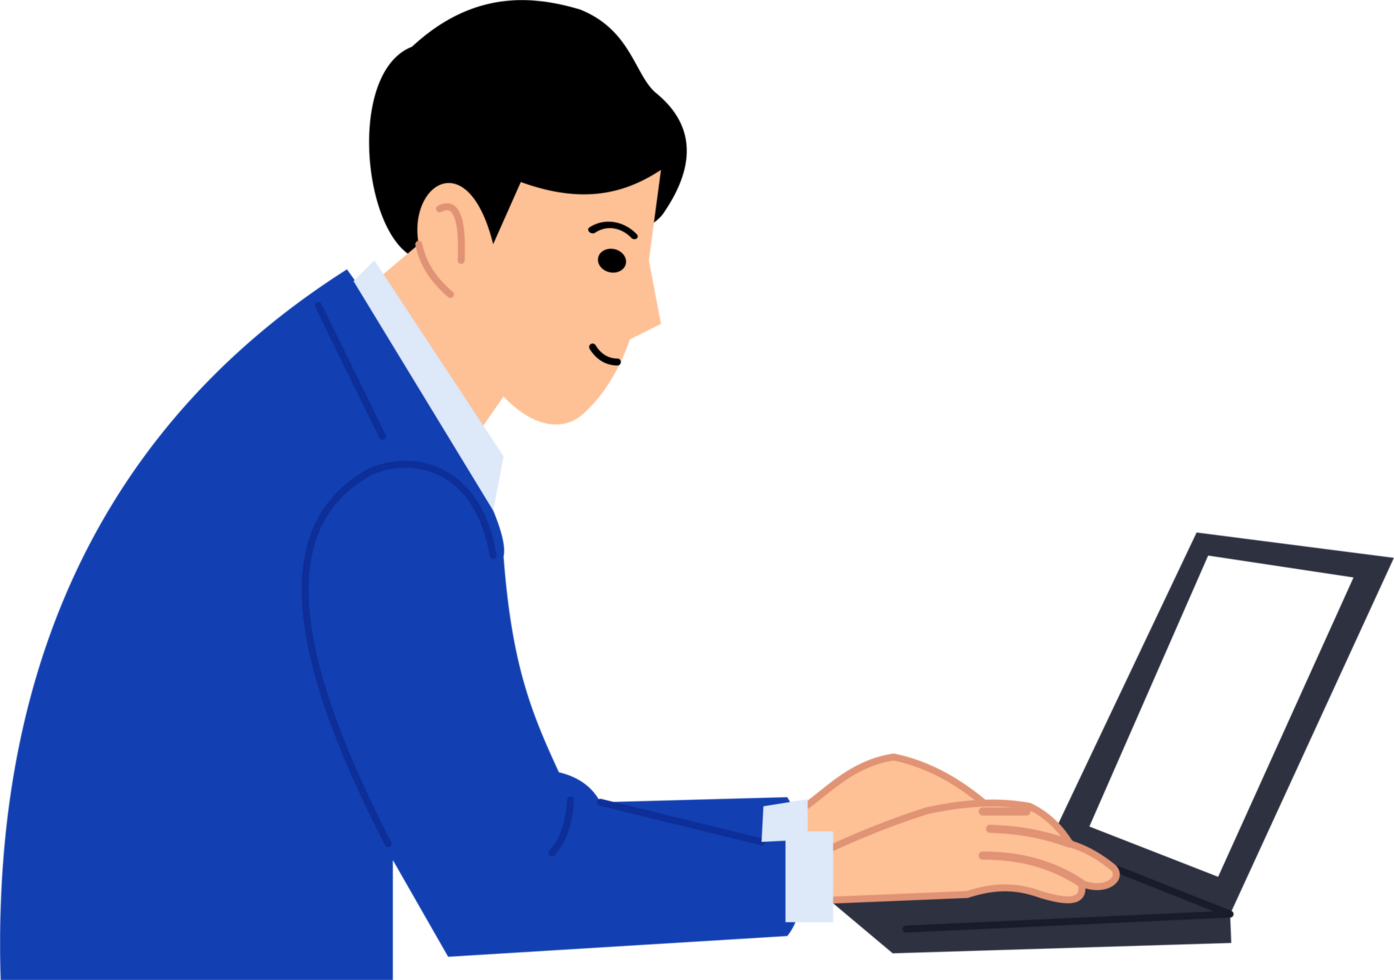 employee working with laptop or man in business suit using laptop png